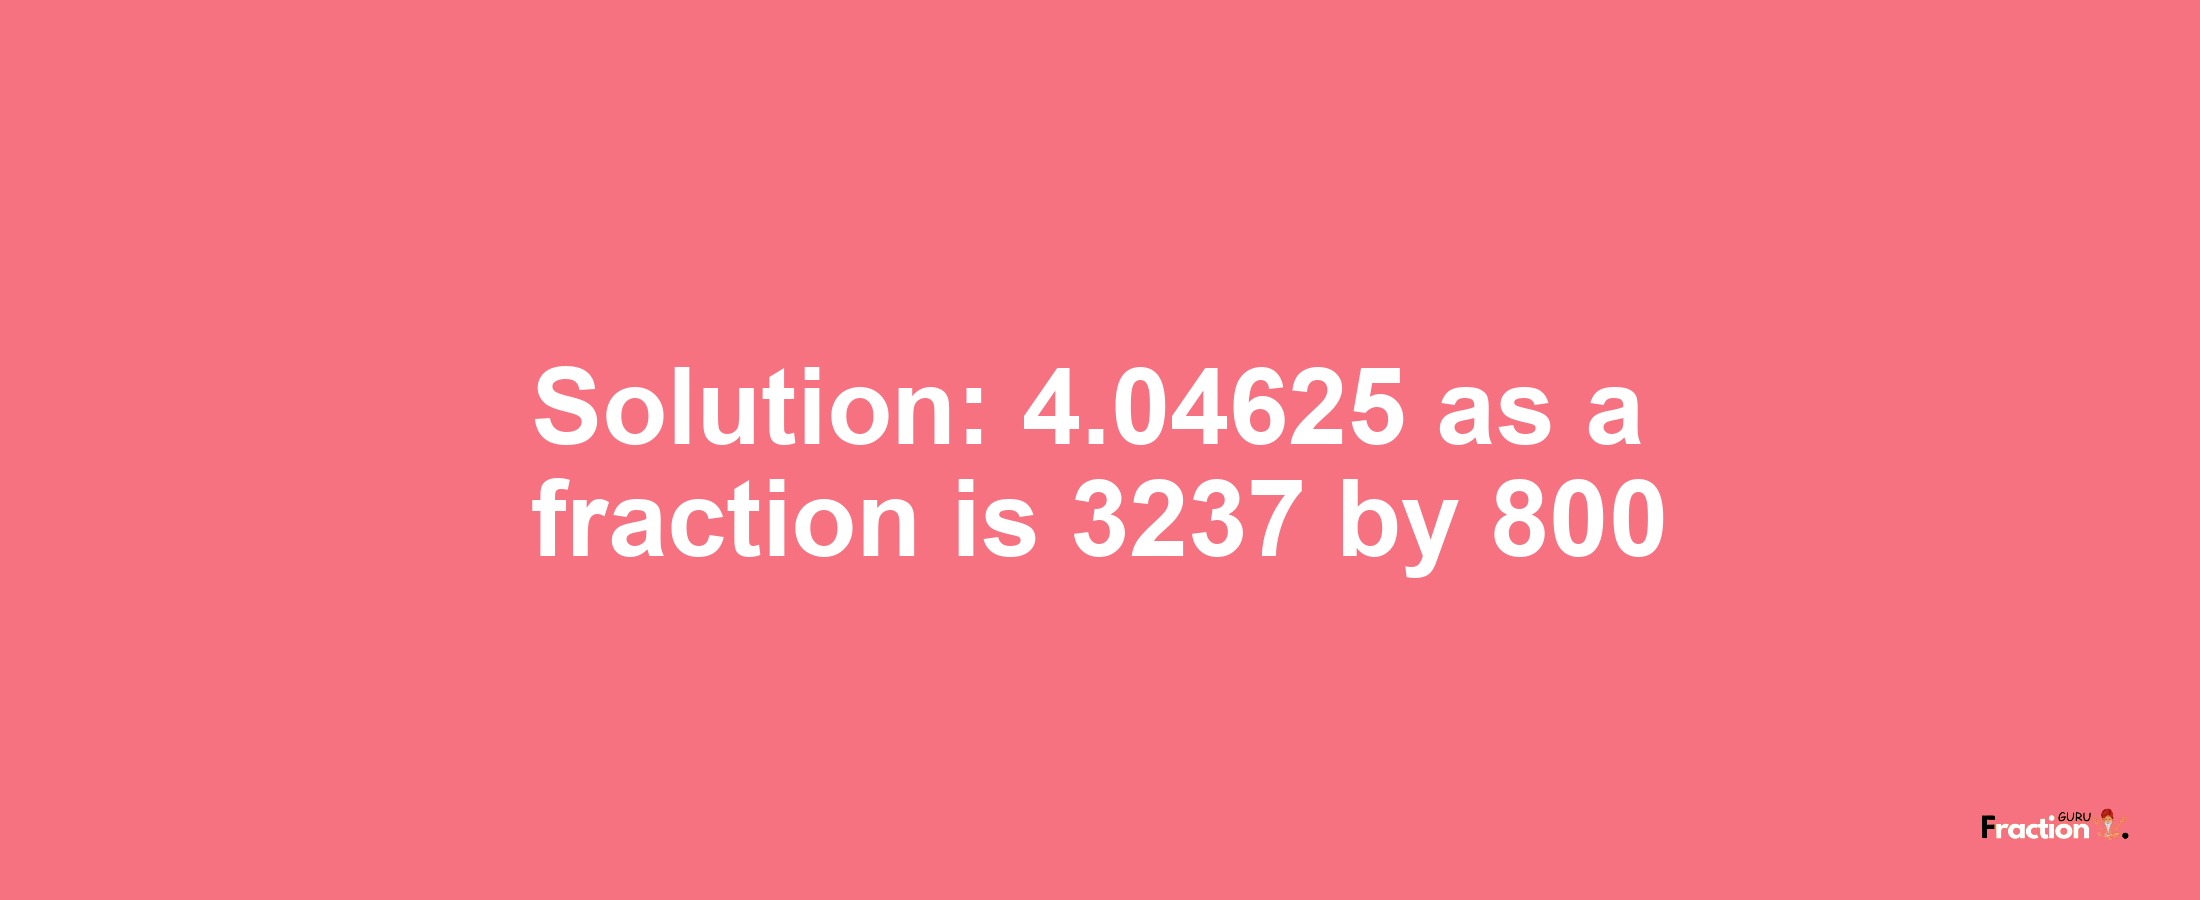 Solution:4.04625 as a fraction is 3237/800